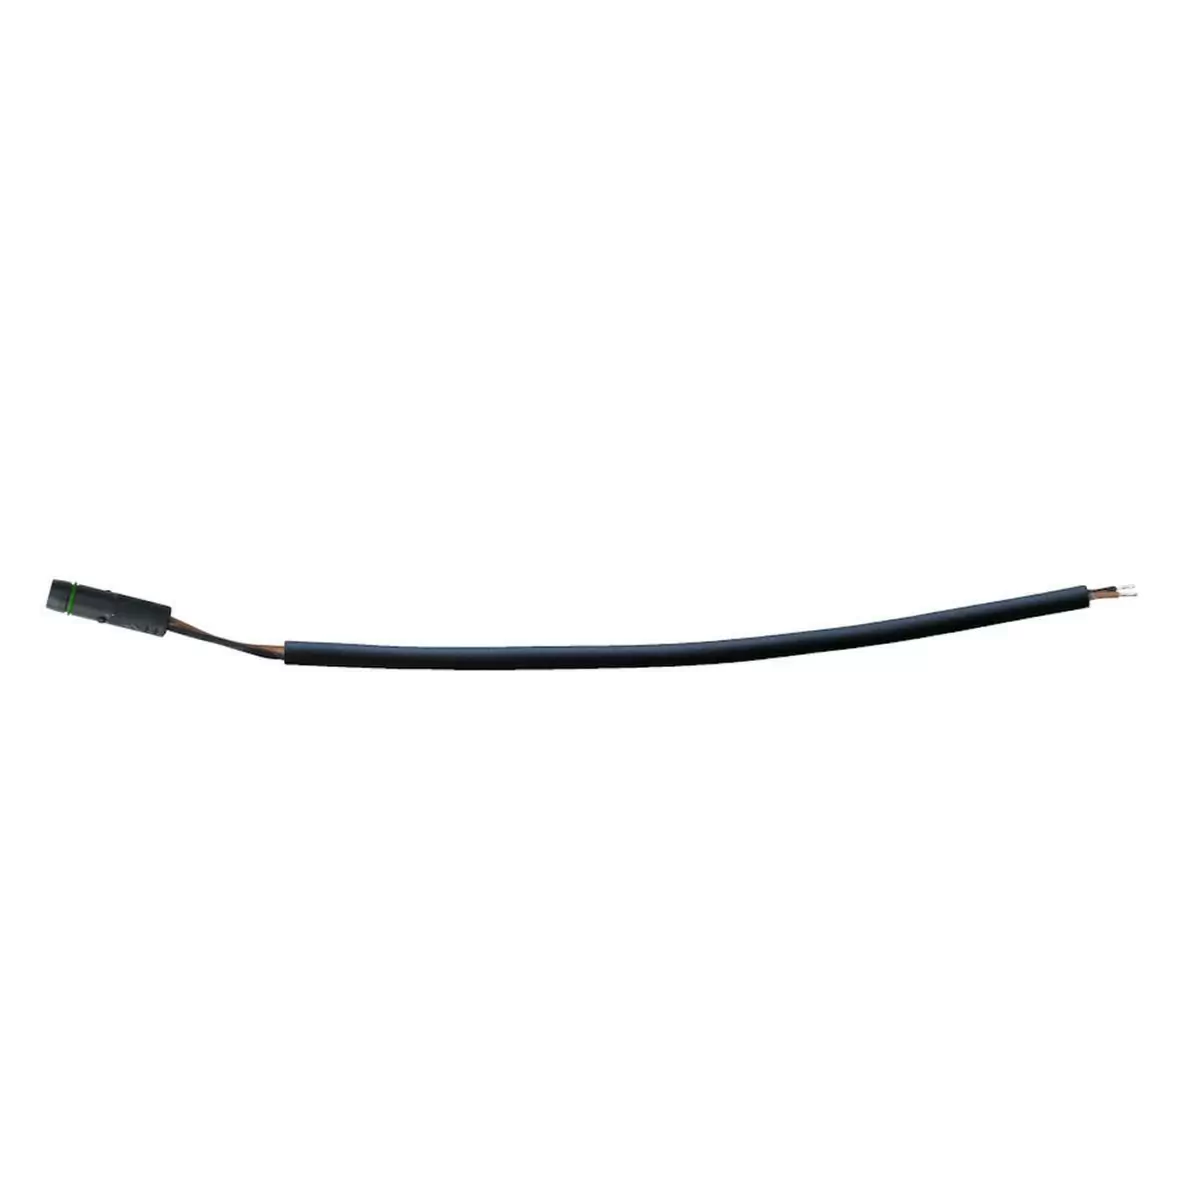 Tail Light Connection Cable 150mm for Brose Systems - image